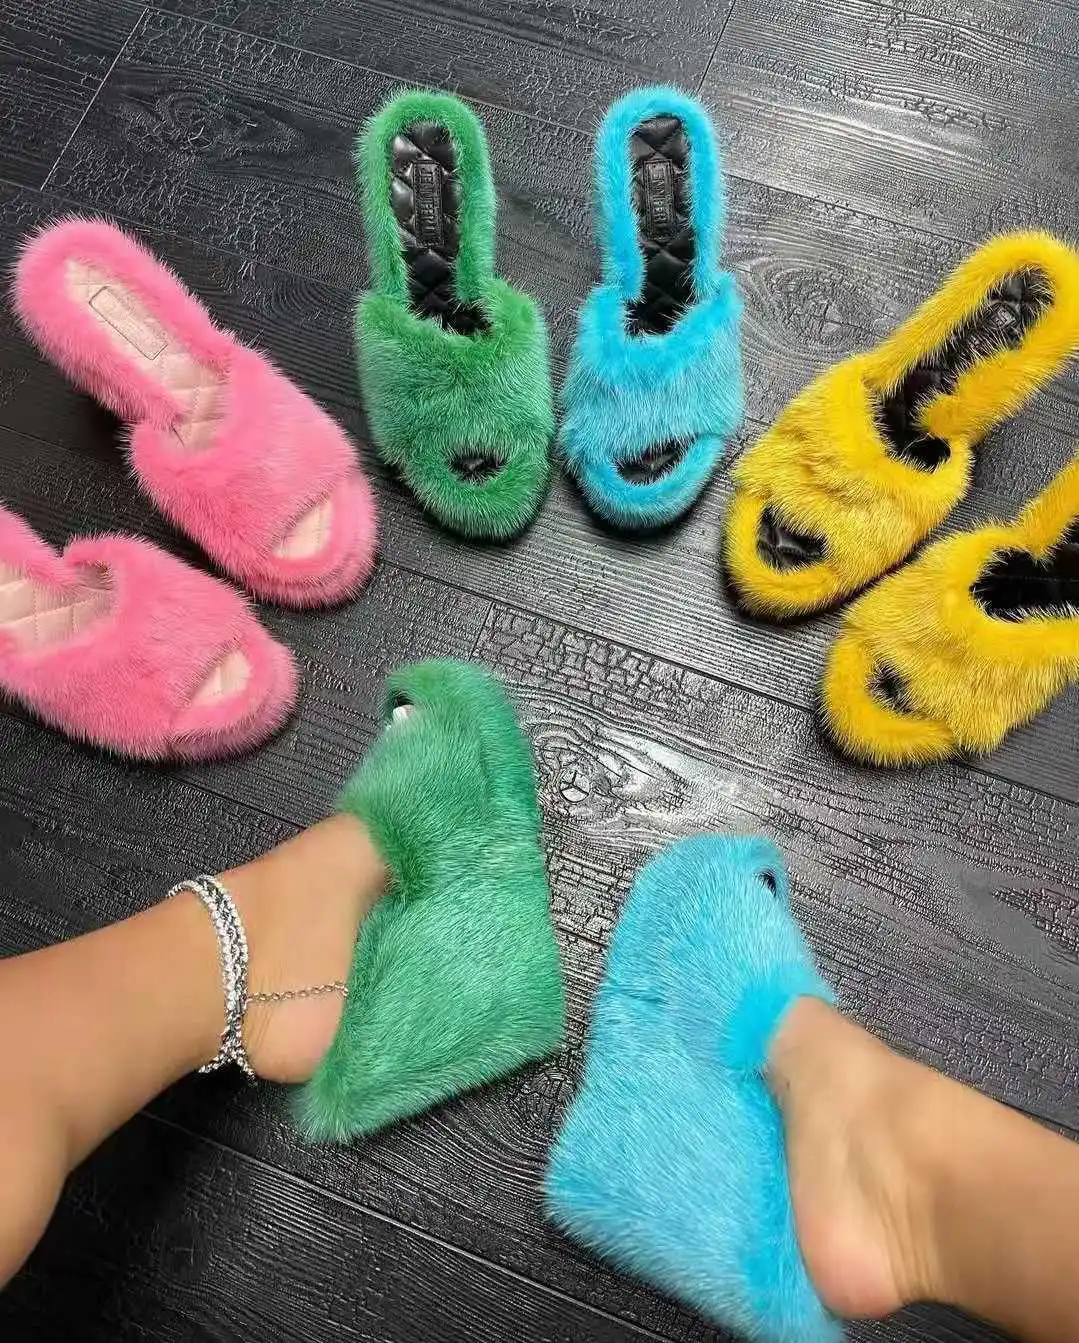 

High quality Mink Fur Slippers Fashion Heeled Sandals Women High Heels Plush Fluffy House Slippers Sexy Wedge Shoes Casual Shoes, As picture